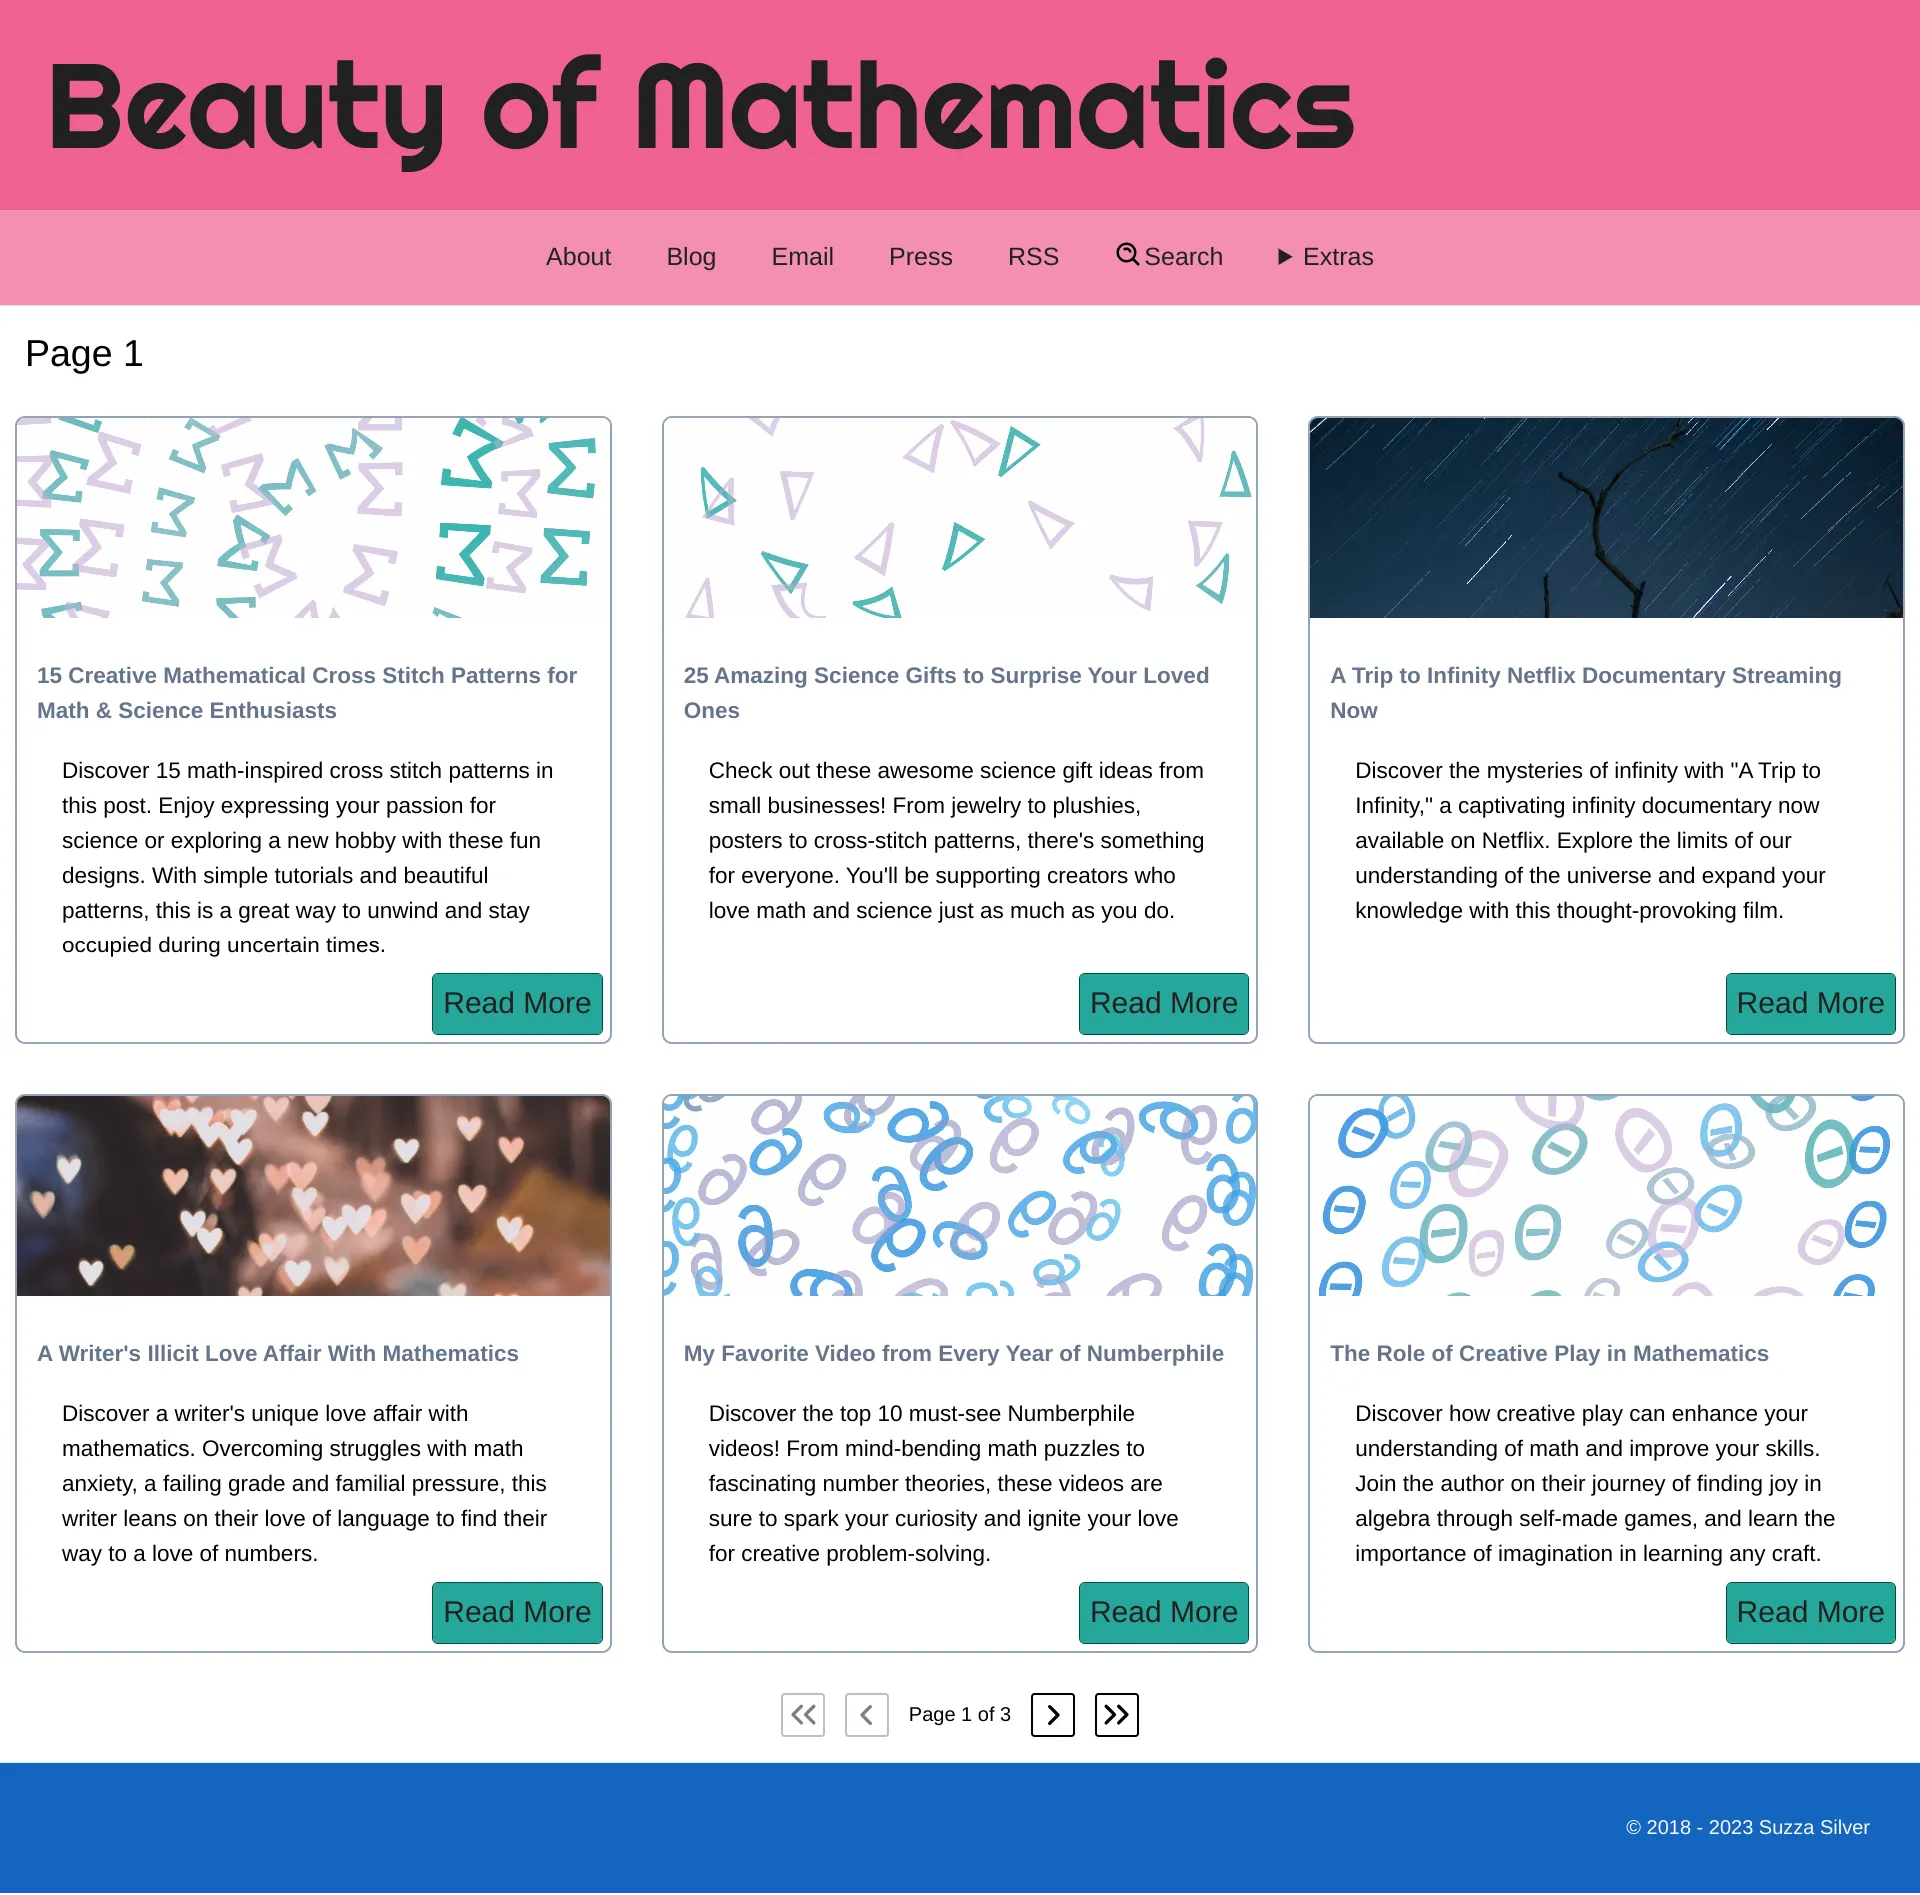 The blog design for Beauty of Mathematics